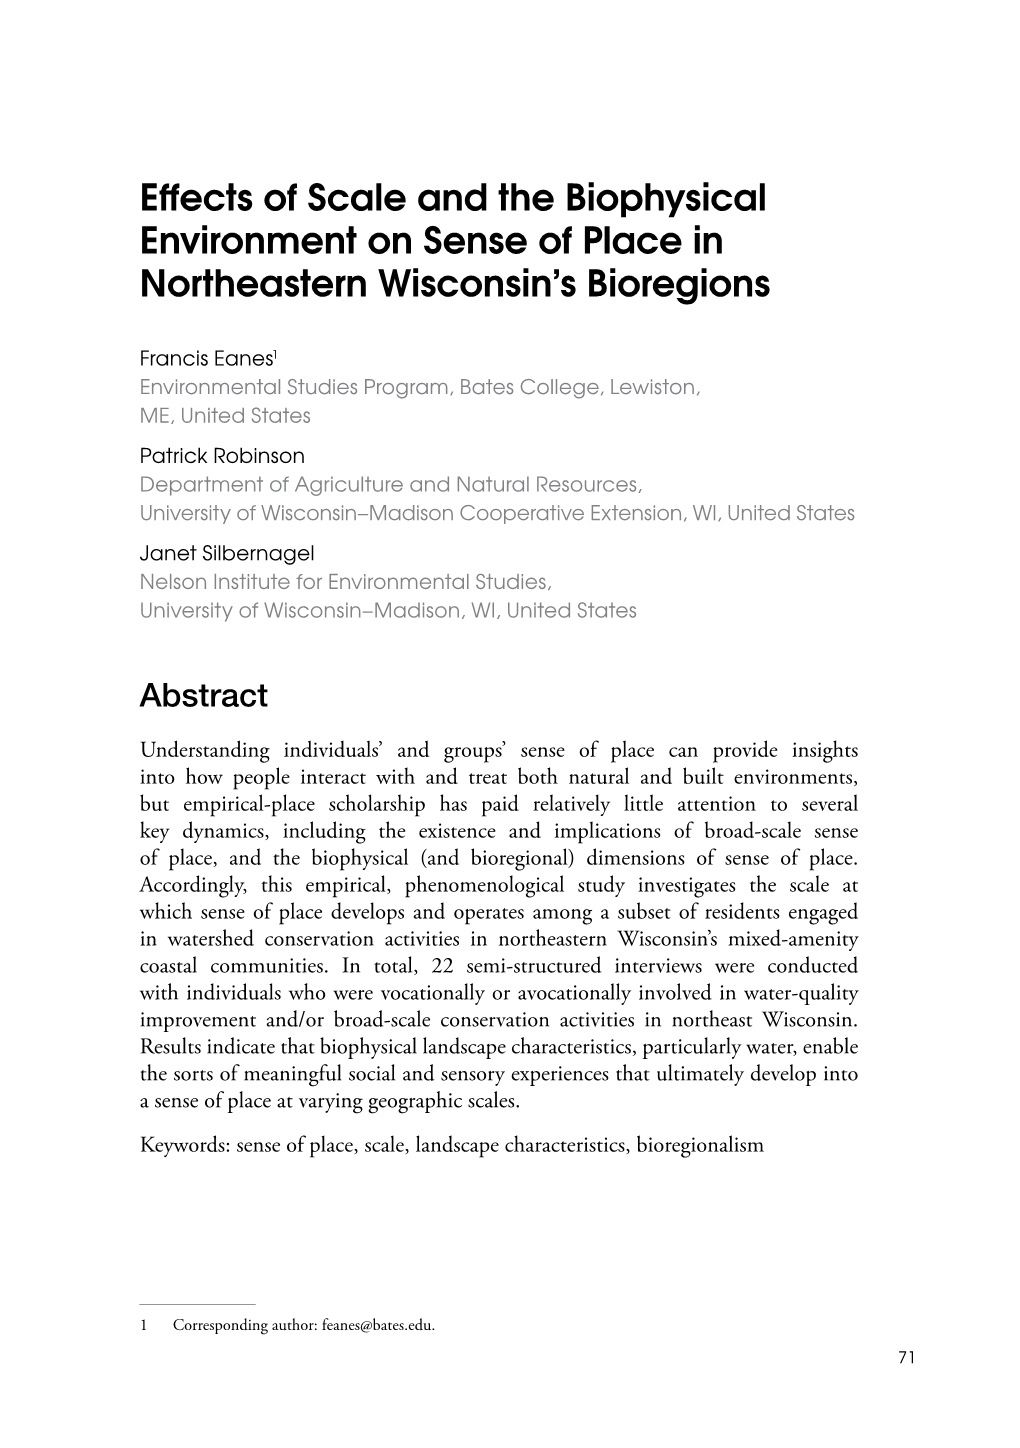 Effects of Scale and the Biophysical Environment on Sense of Place in Northeastern Wisconsin’S Bioregions